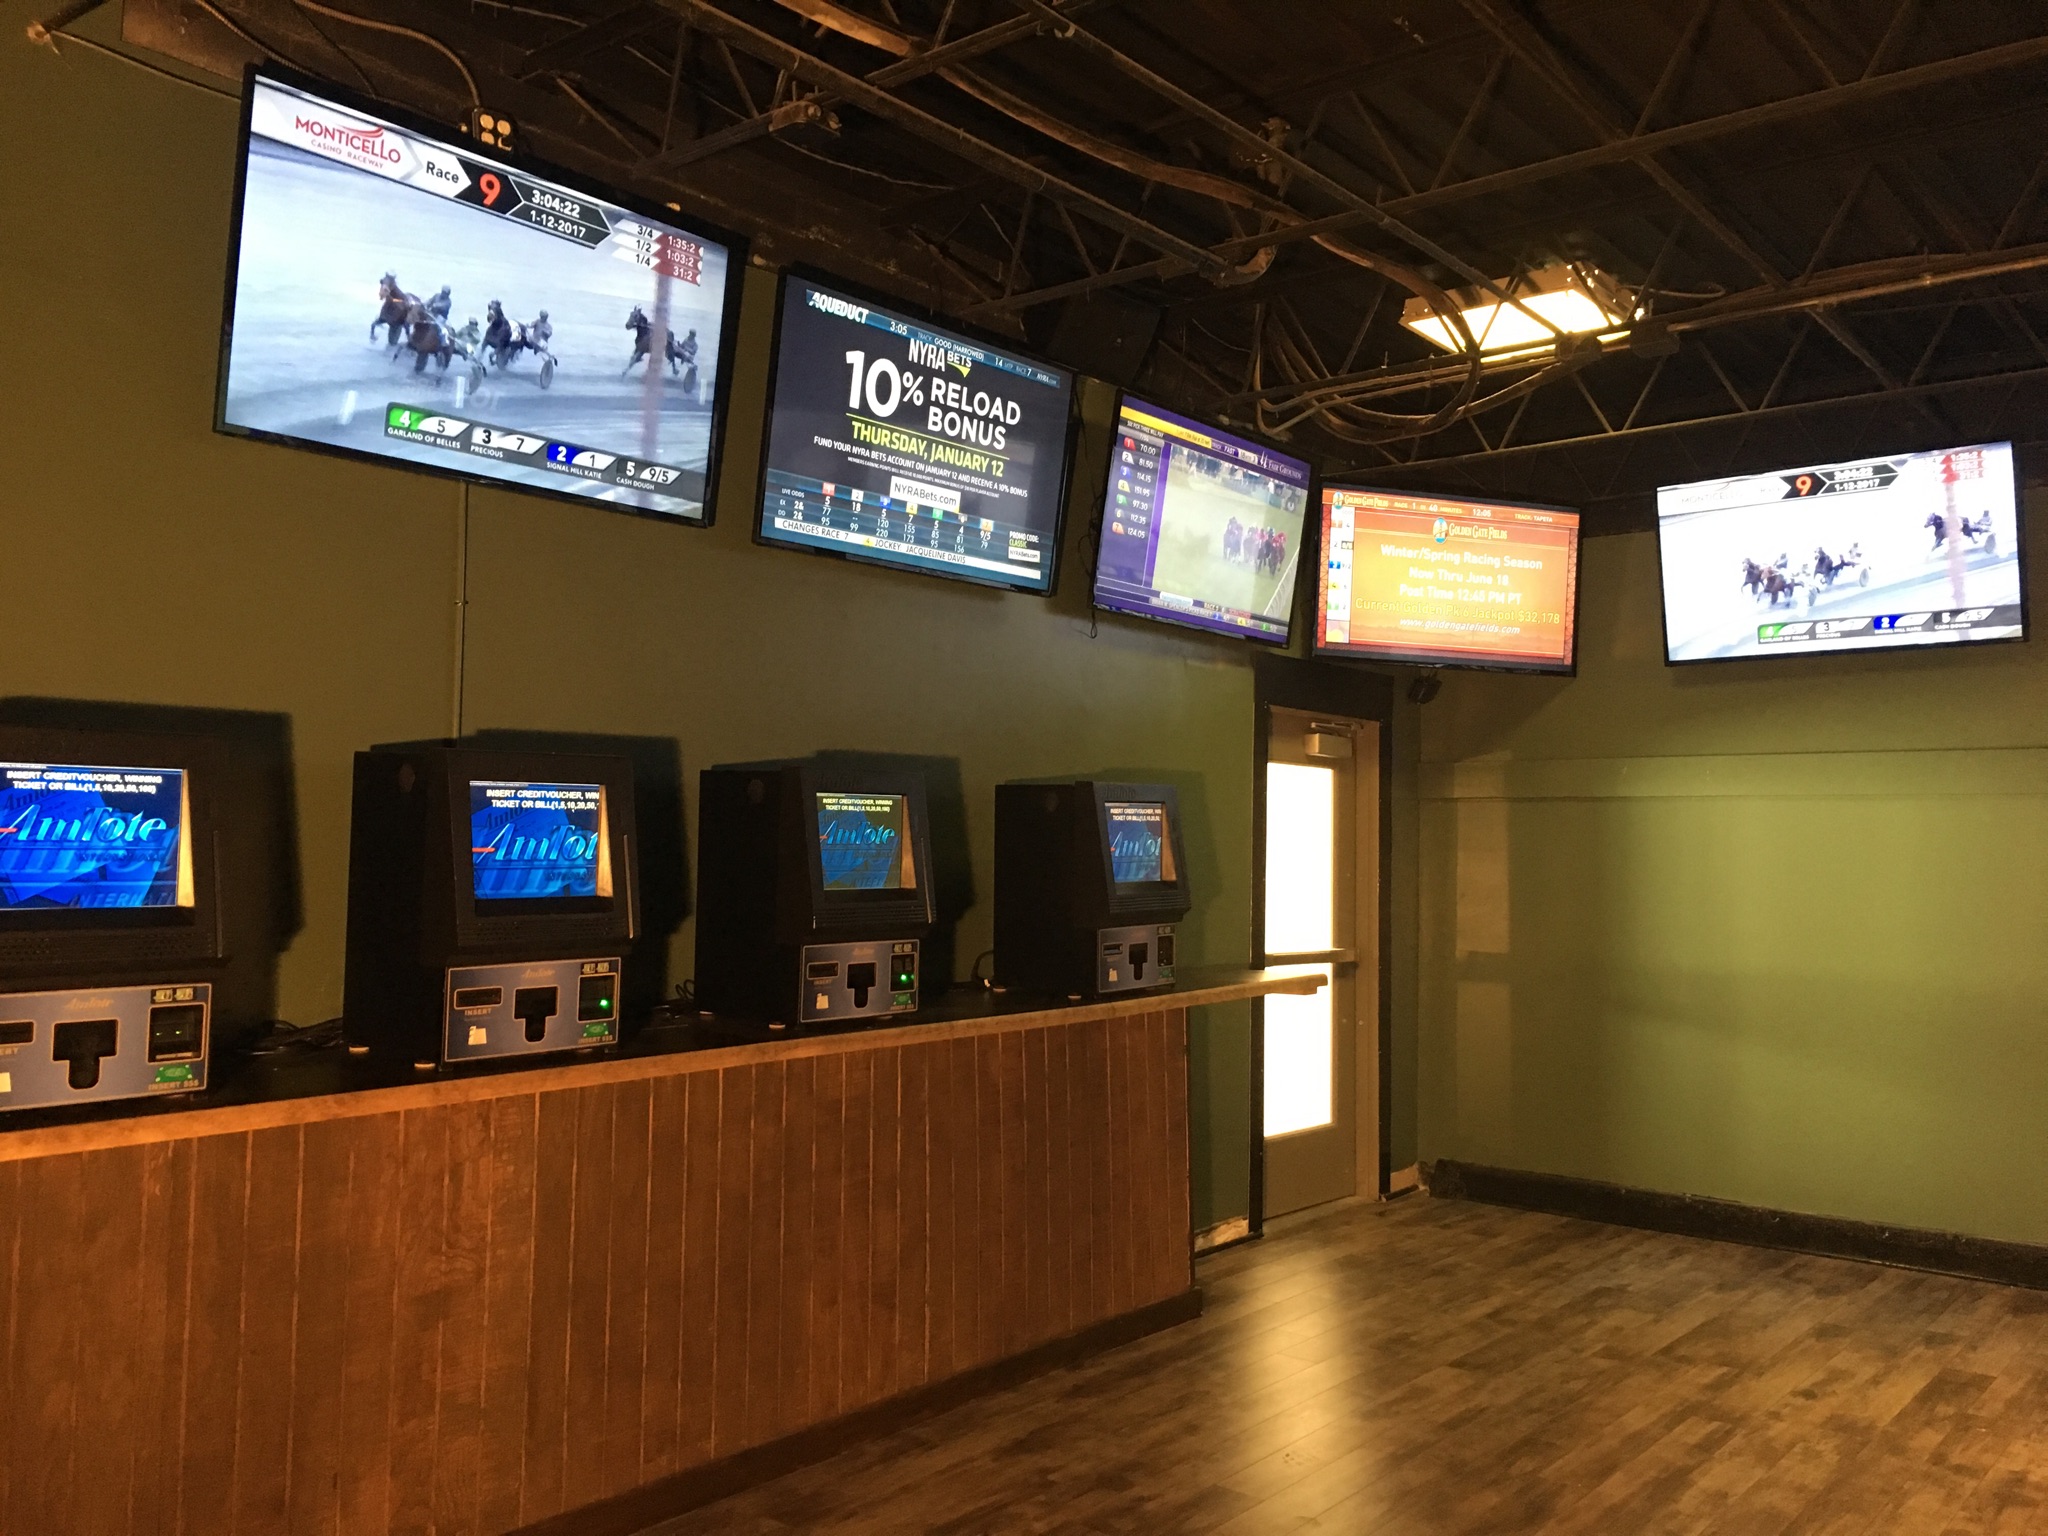 Ponies & Pints features a horseplayers exclusive room with 4 self betting terminals, 2 manned teller stations and 13 flat screen TVs